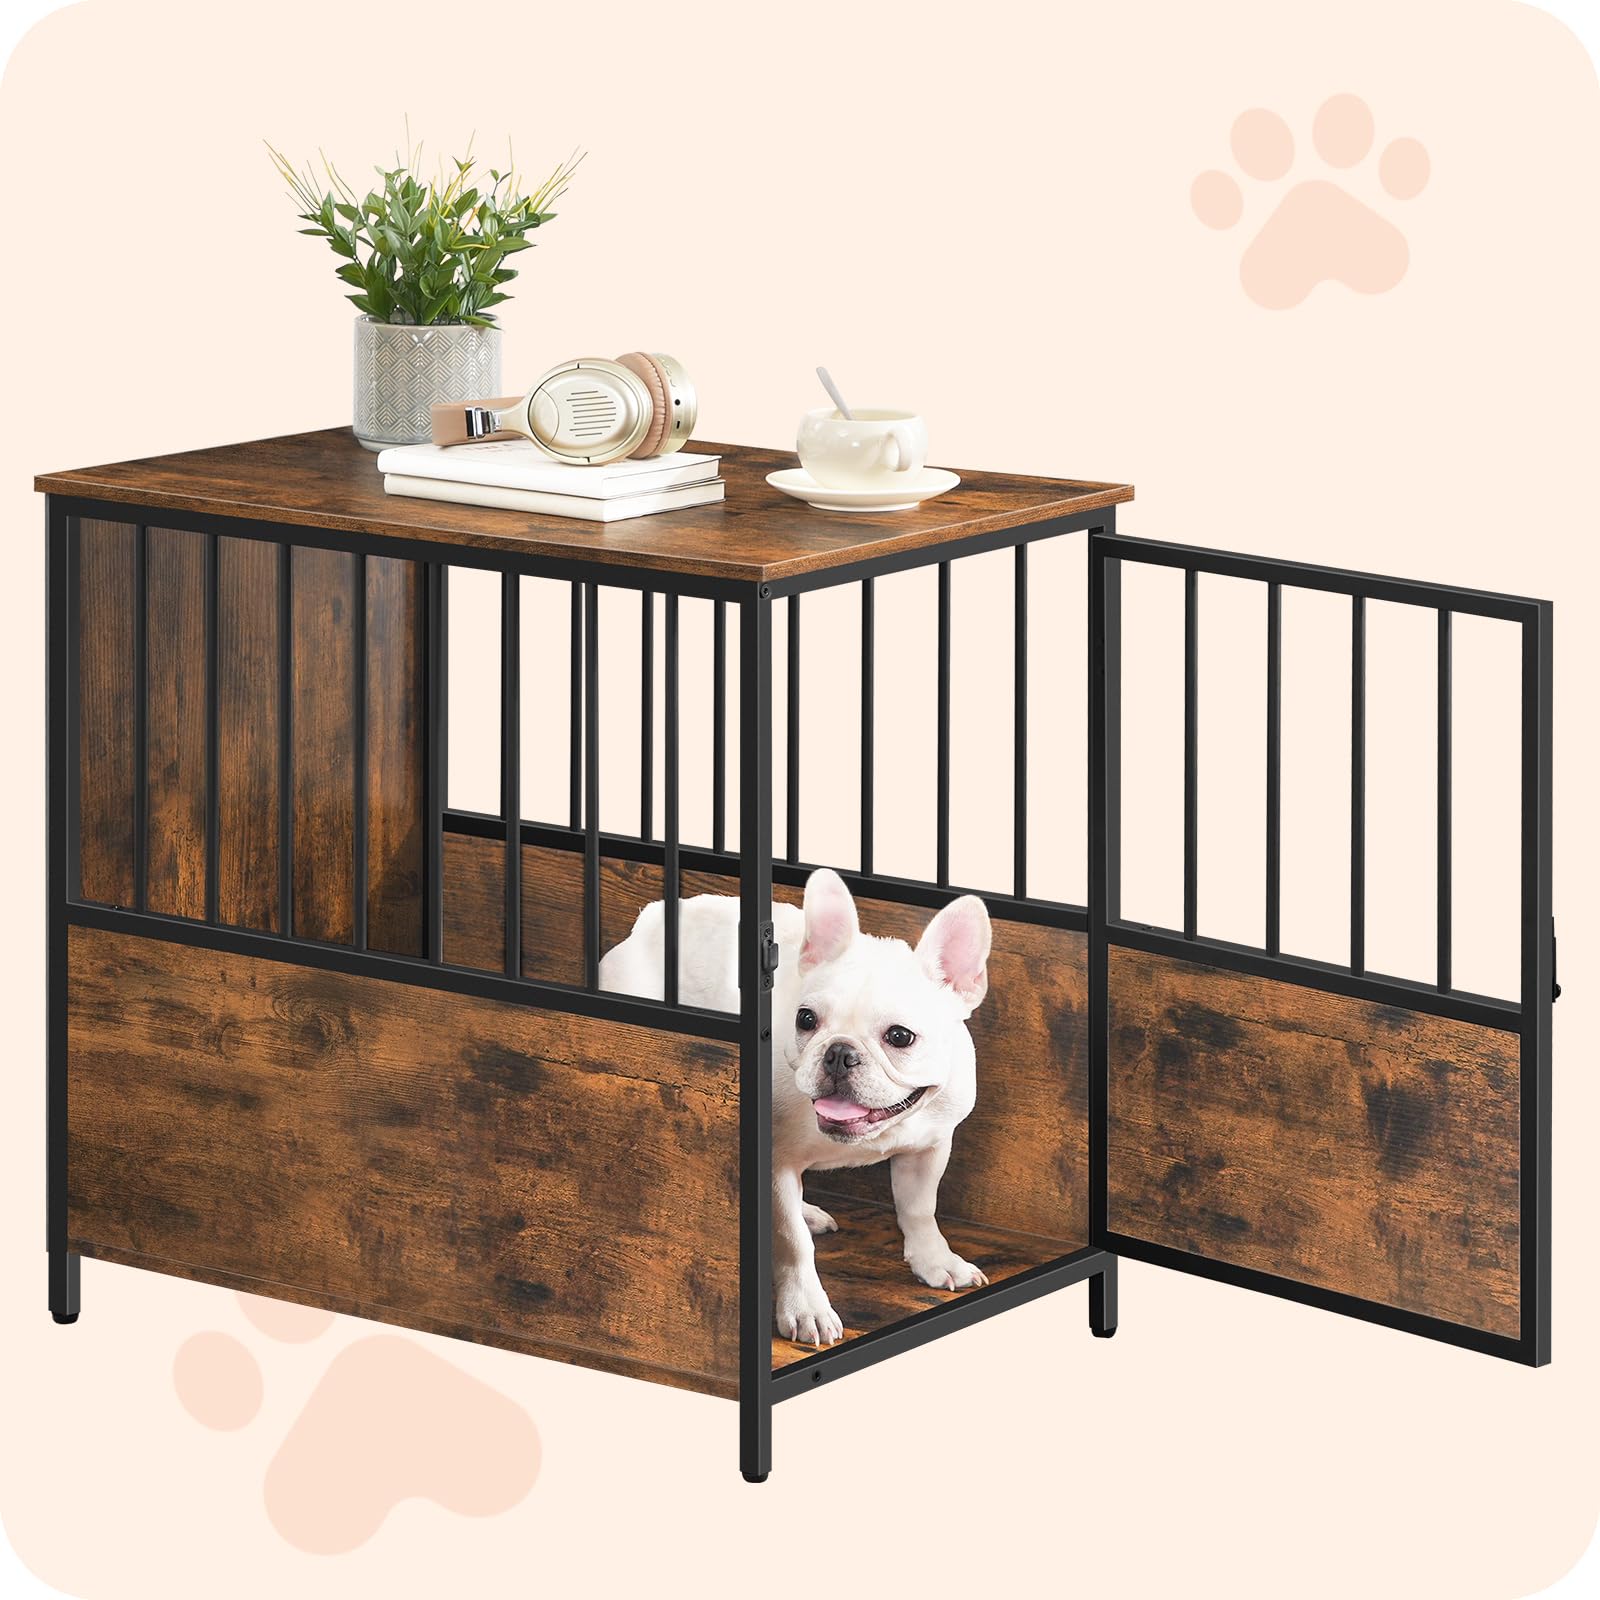 MAHANCRIS Dog Crate Furniture, Wooden Dog Kennel for Small Medium Dogs, Heavy Duty Dog Cage with Lockable Door, Decorative Indoor Dog House End Table, Chew-Resistant, Rustic Brown DCHR6601